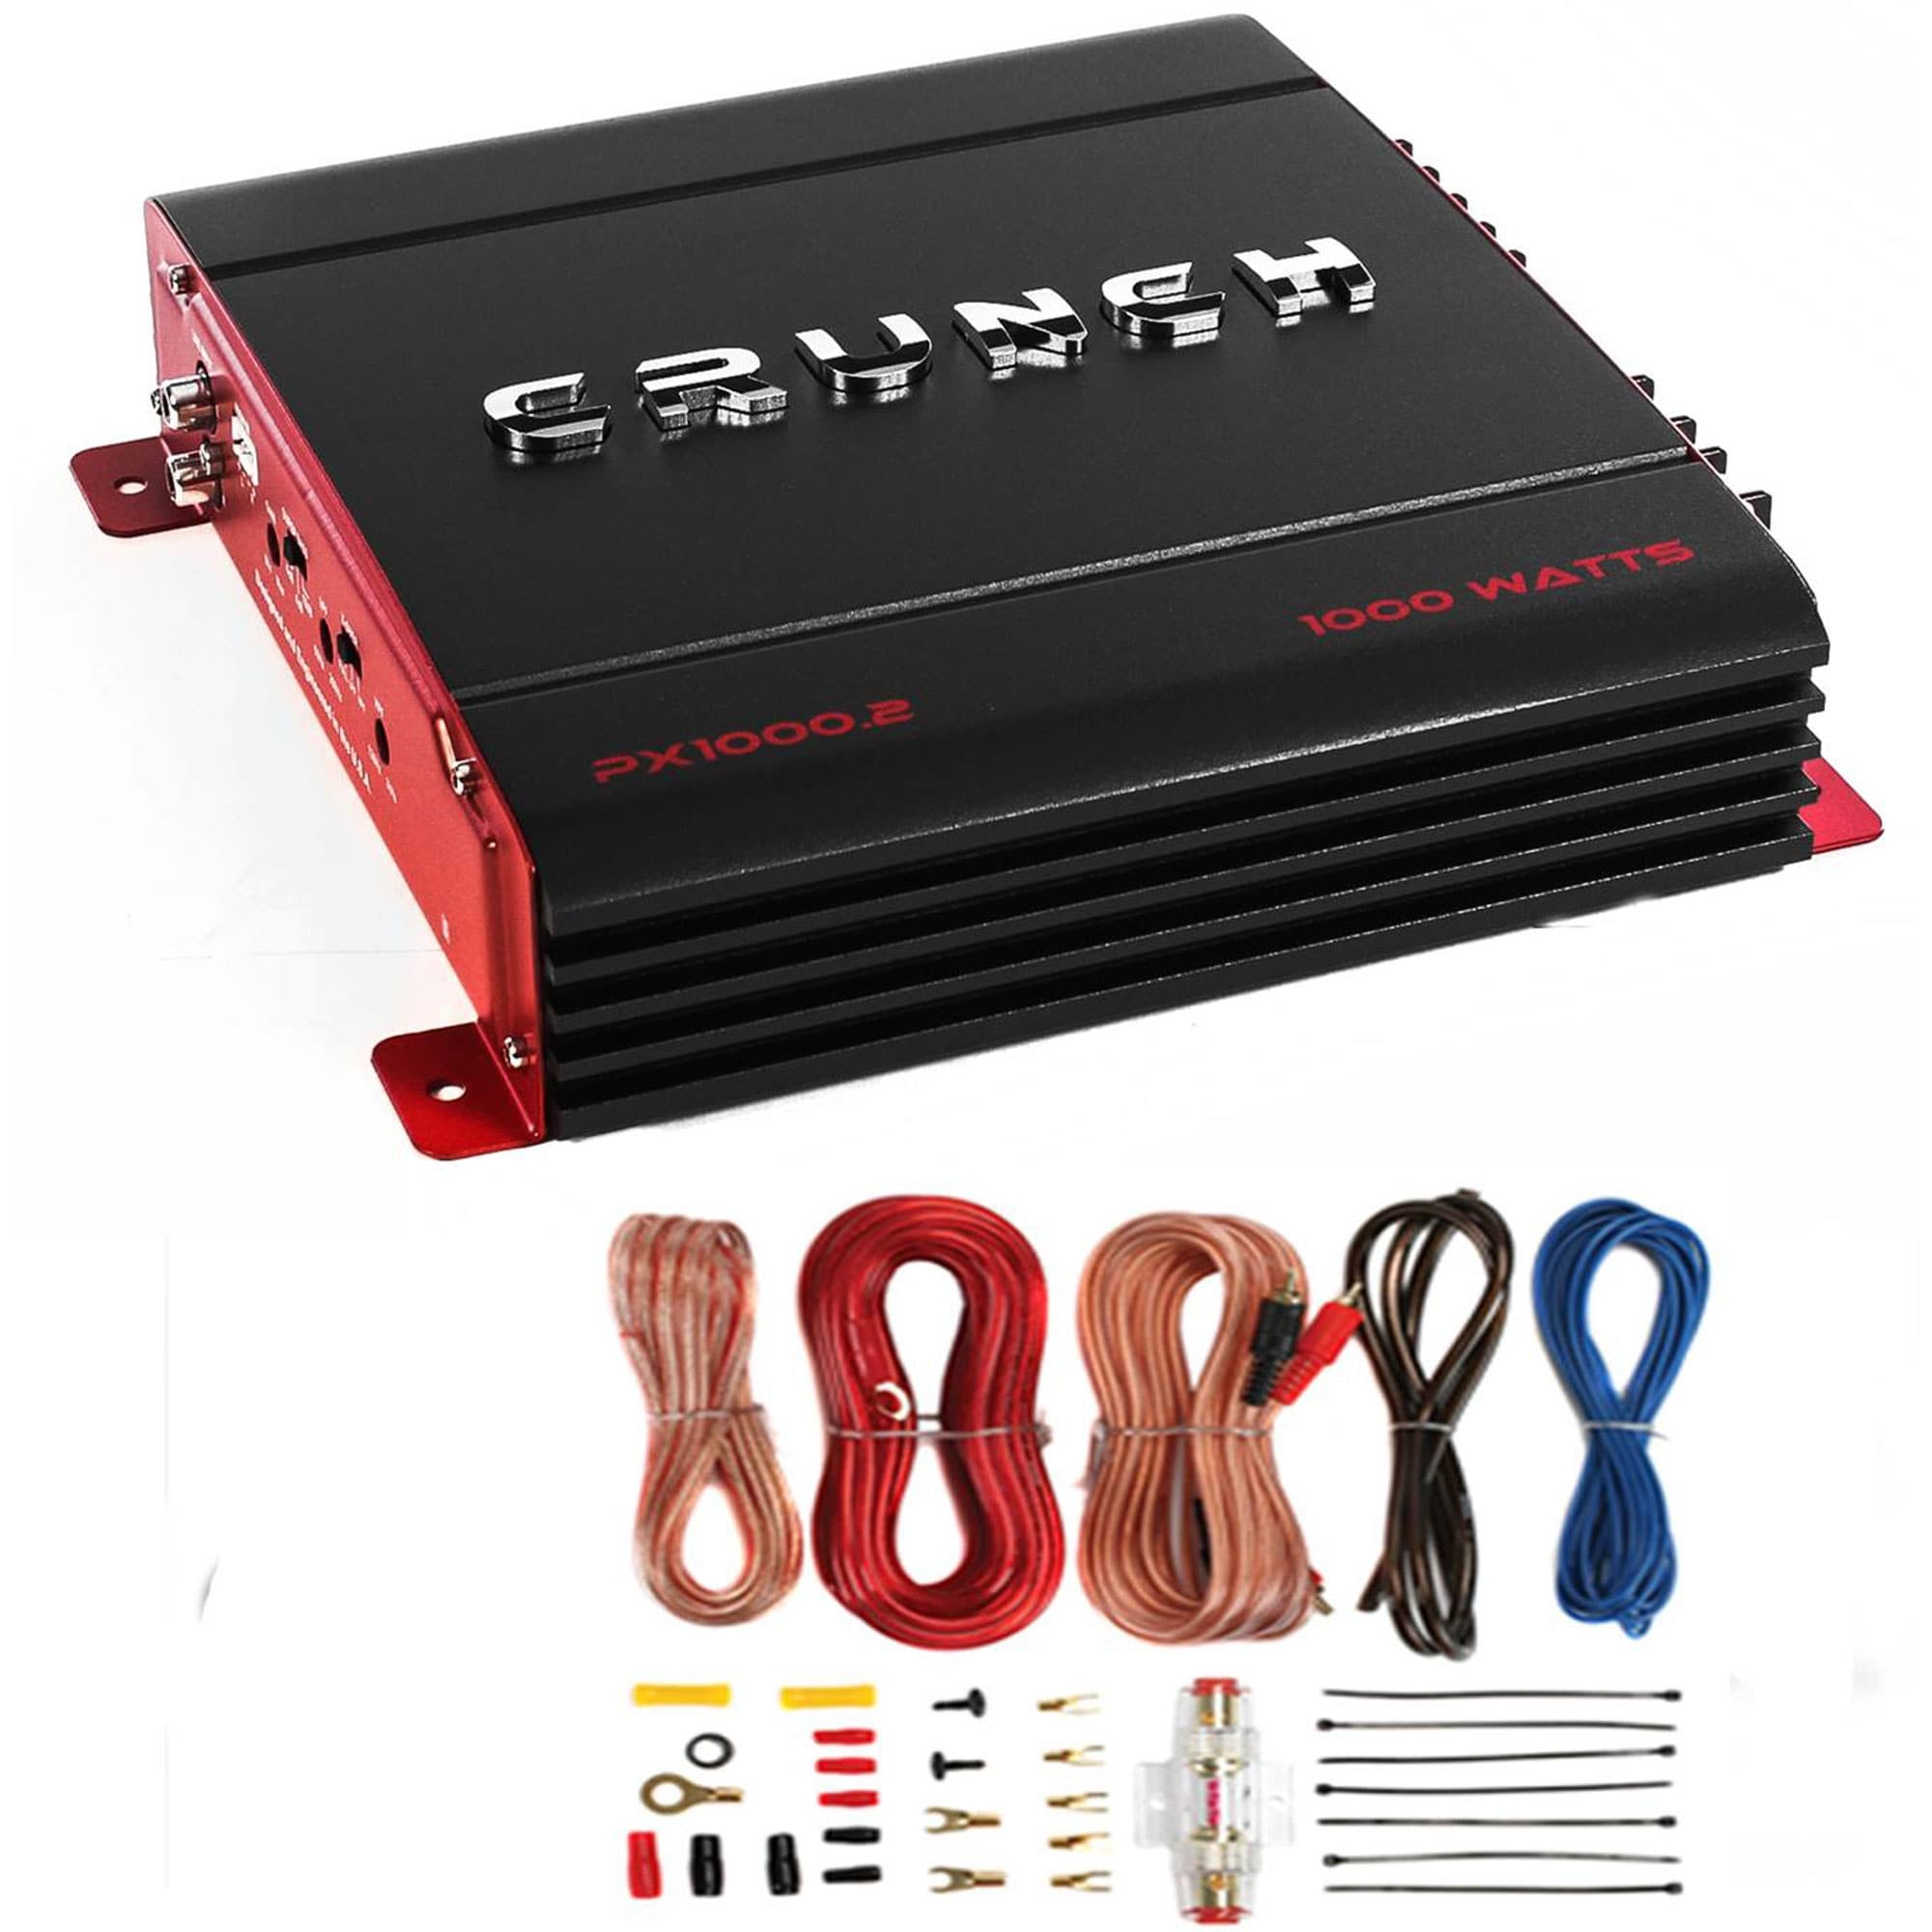 Crunch PX-1000.4 1000W Car Stereo Amp & Soundstorm...